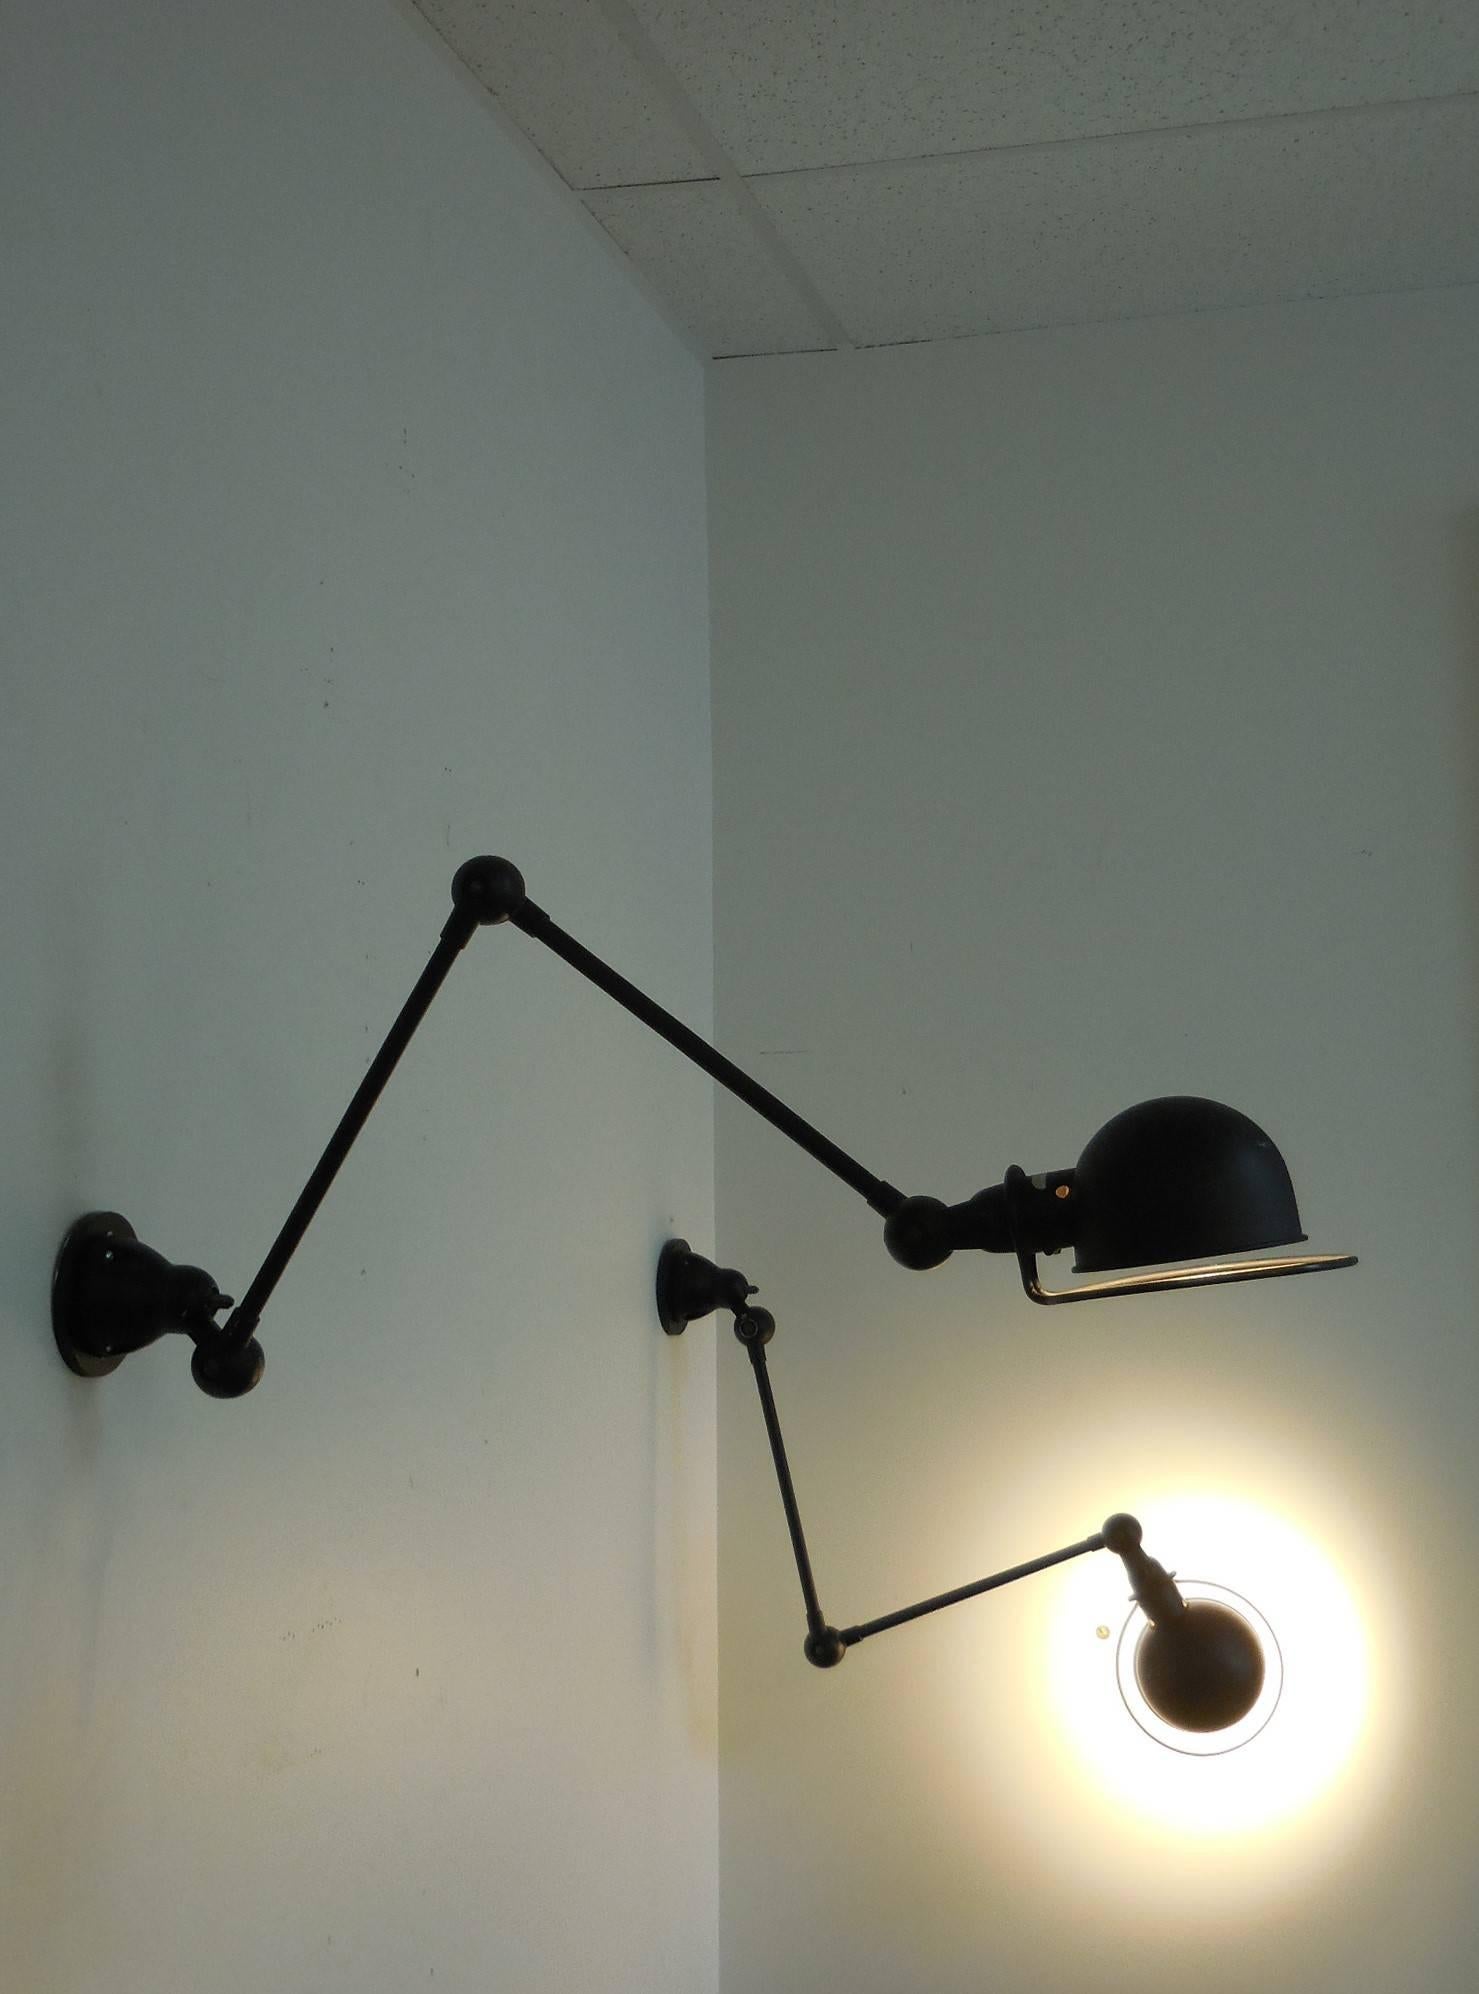 A pair of adjustable arm sconces. There are three articulated joints that allow the arms to be extended in multiple configurations, keep in mind that the diffuser also rotates. Black enamel finish. Retain original wall mounting plates. Original